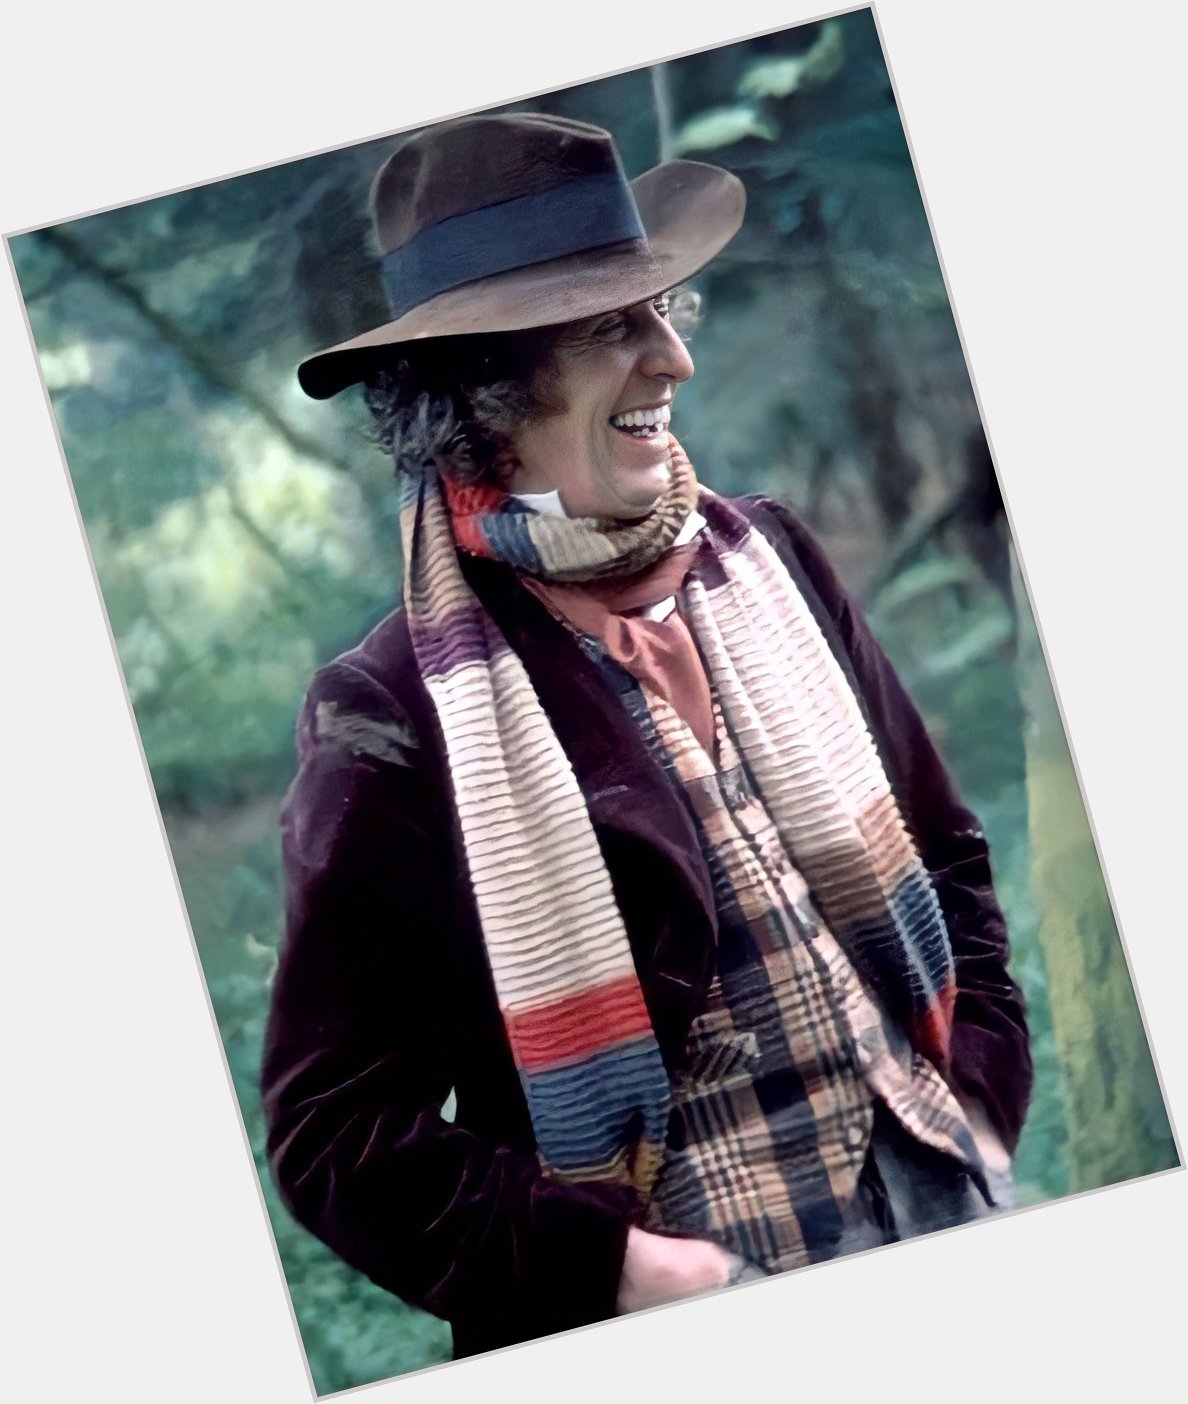 A very happy birthday to Tom Baker, my most favorite Doctor of them all.  